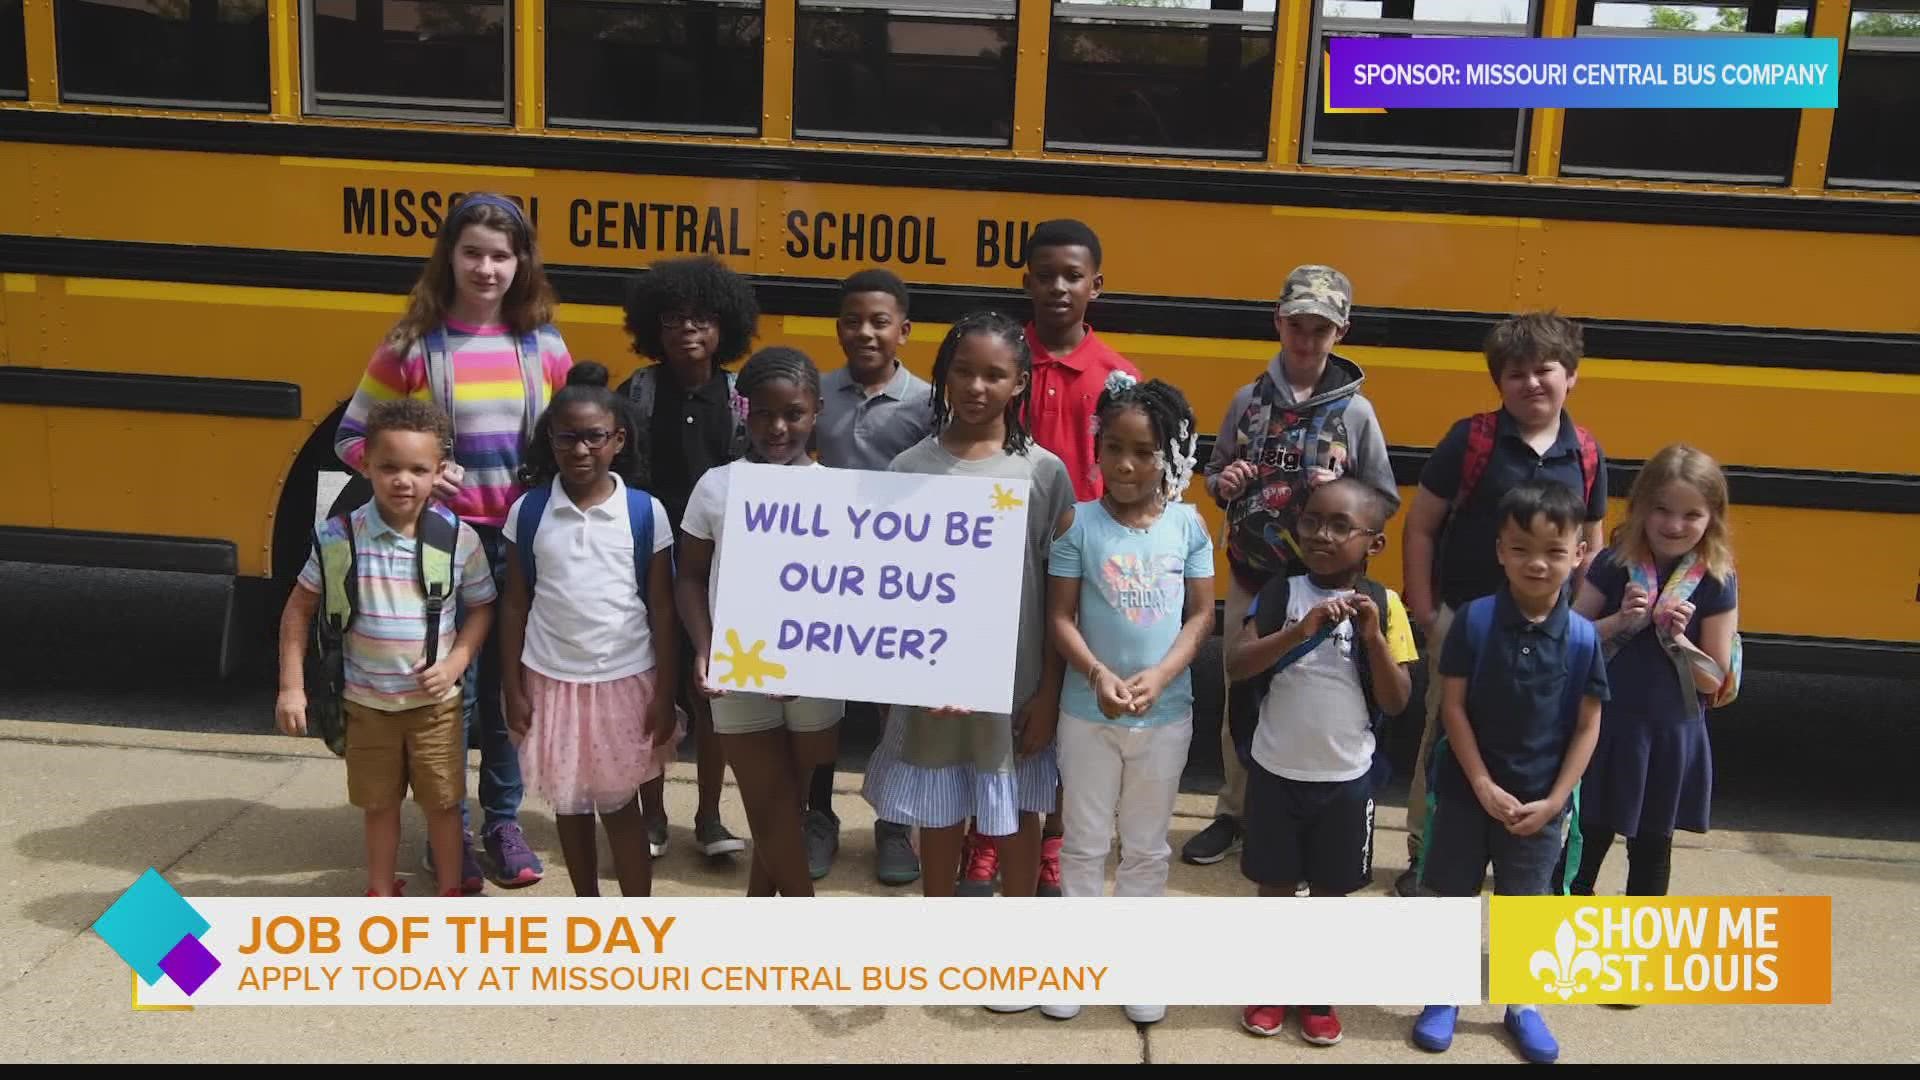 Missouri Central School Bus Company is hiring drivers right now in St. Louis. Apply today at driveayellowbus.com.